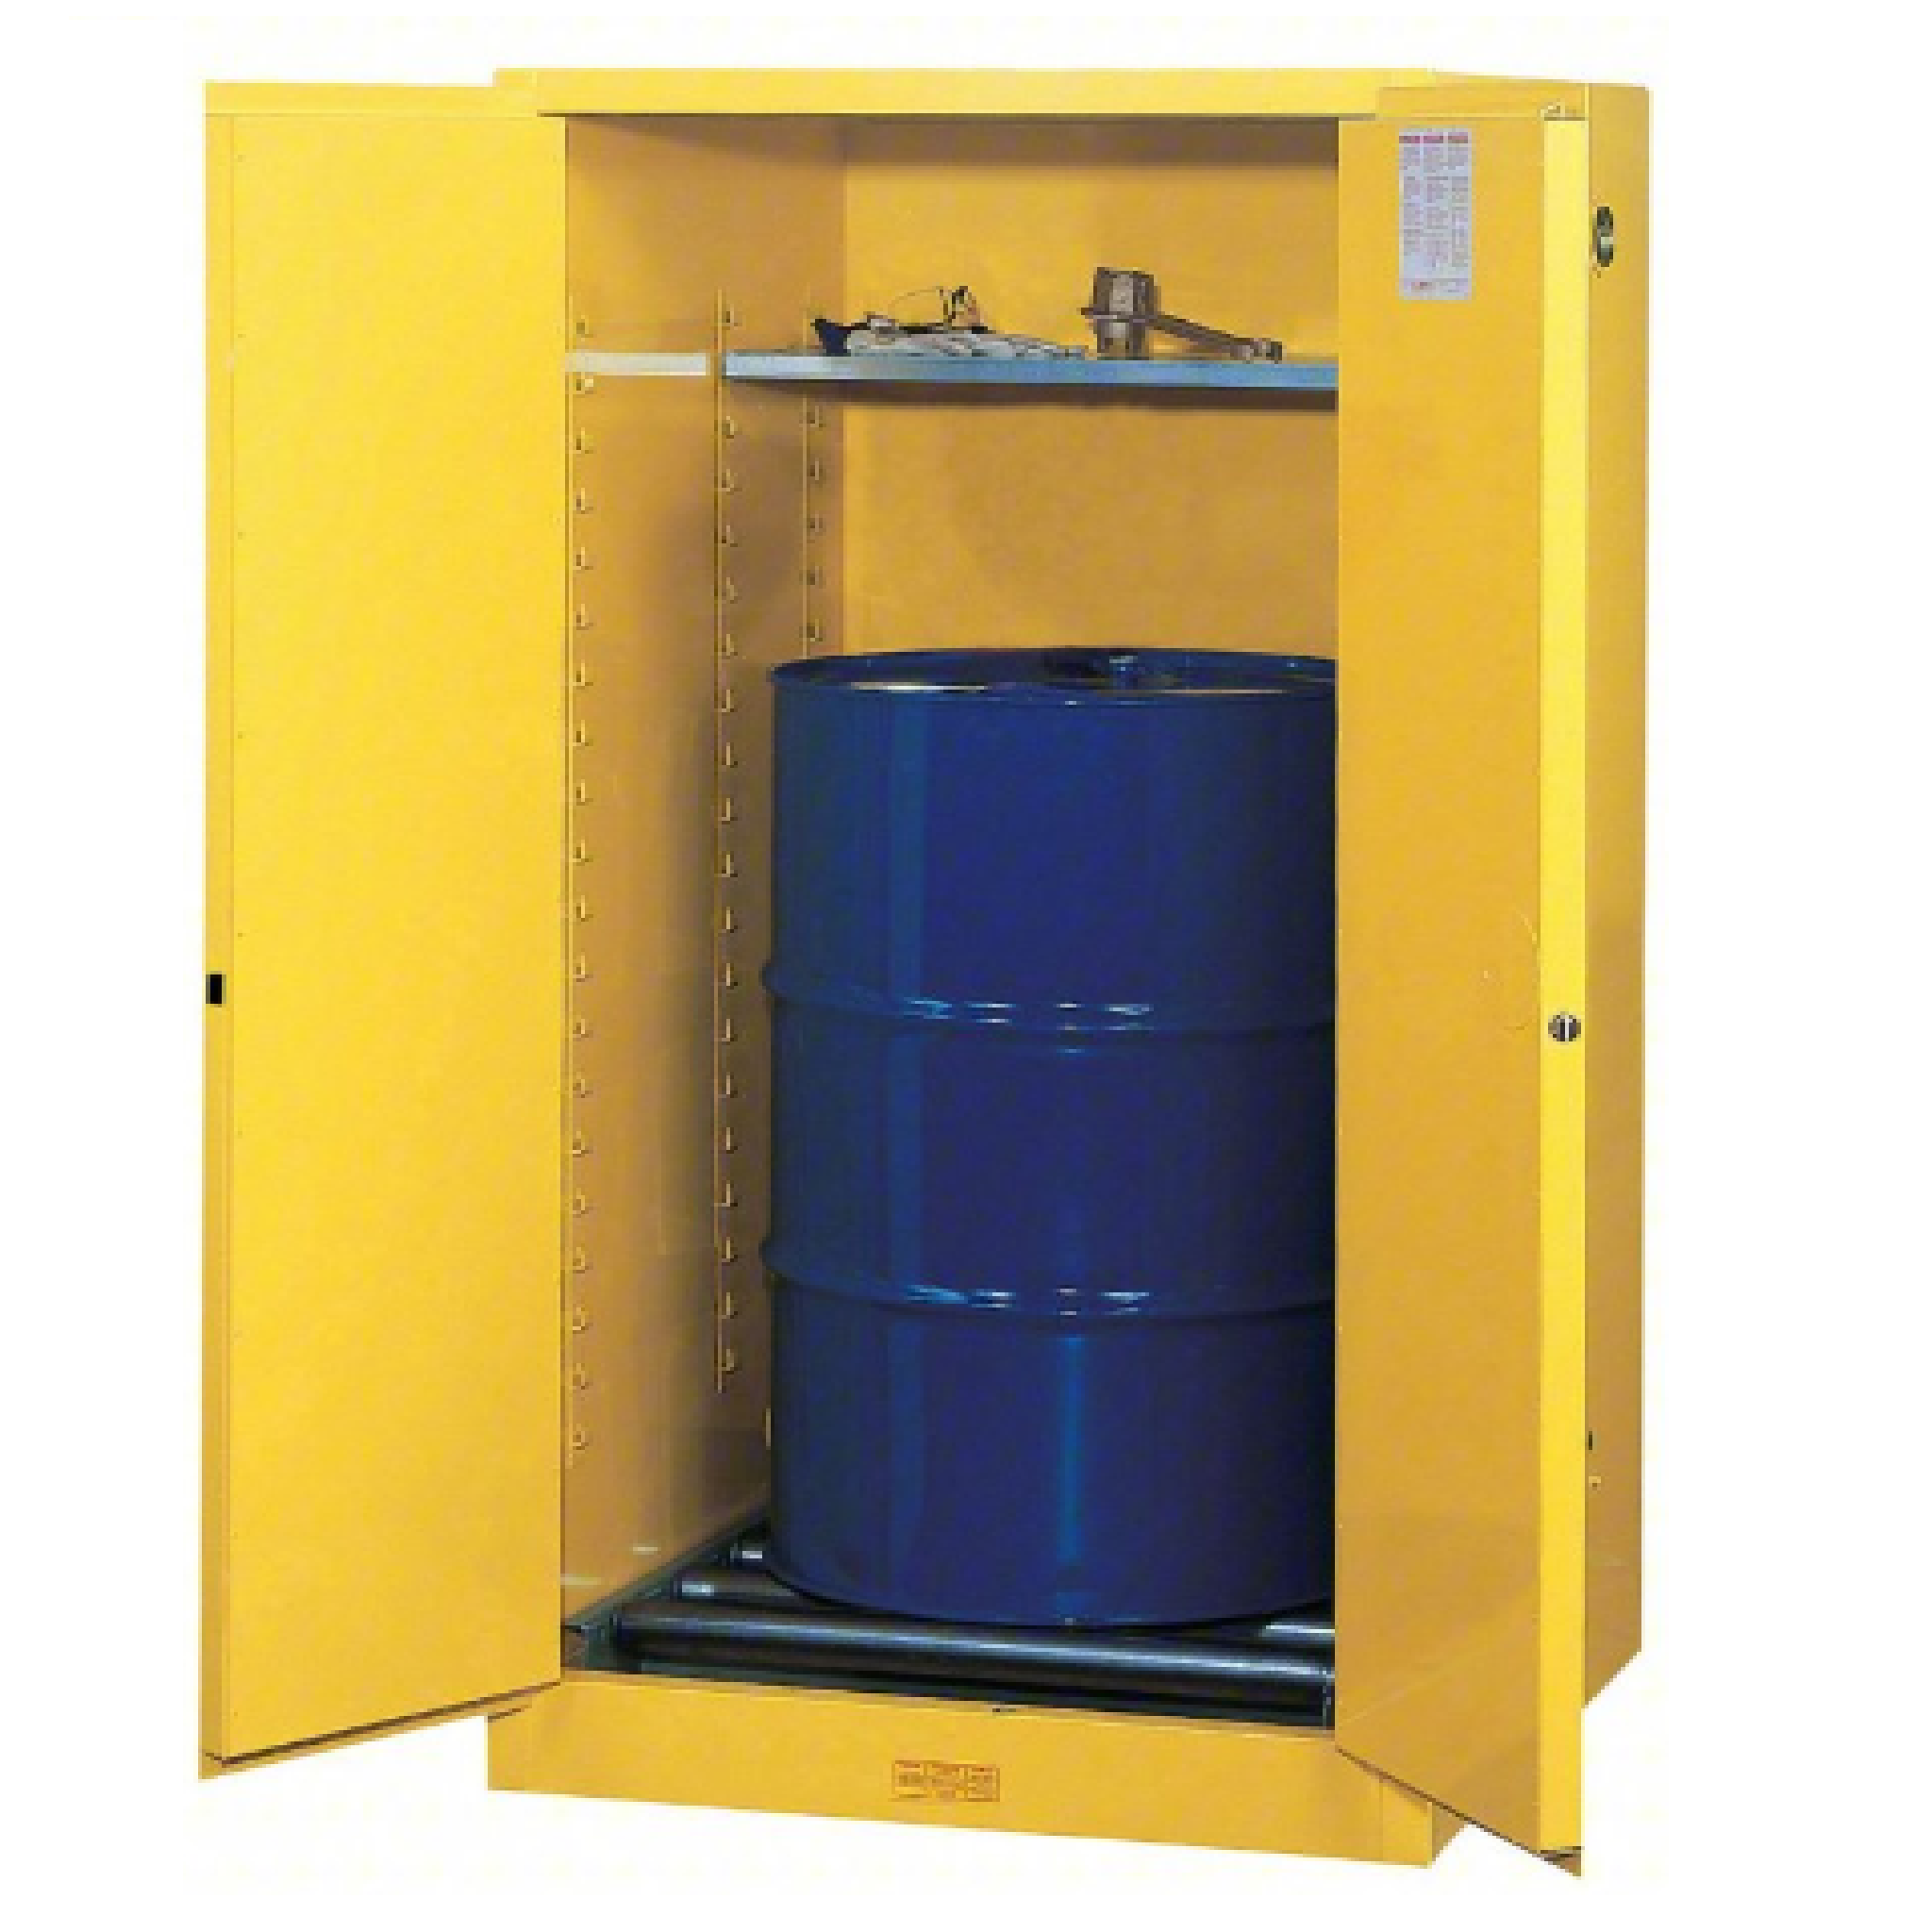 JUSTRITE 896260 Vertical DRUM SAFETY CABINET WITH DRUM ROLLERS 55 GALLONS, 1 Shelf, 2 Doors